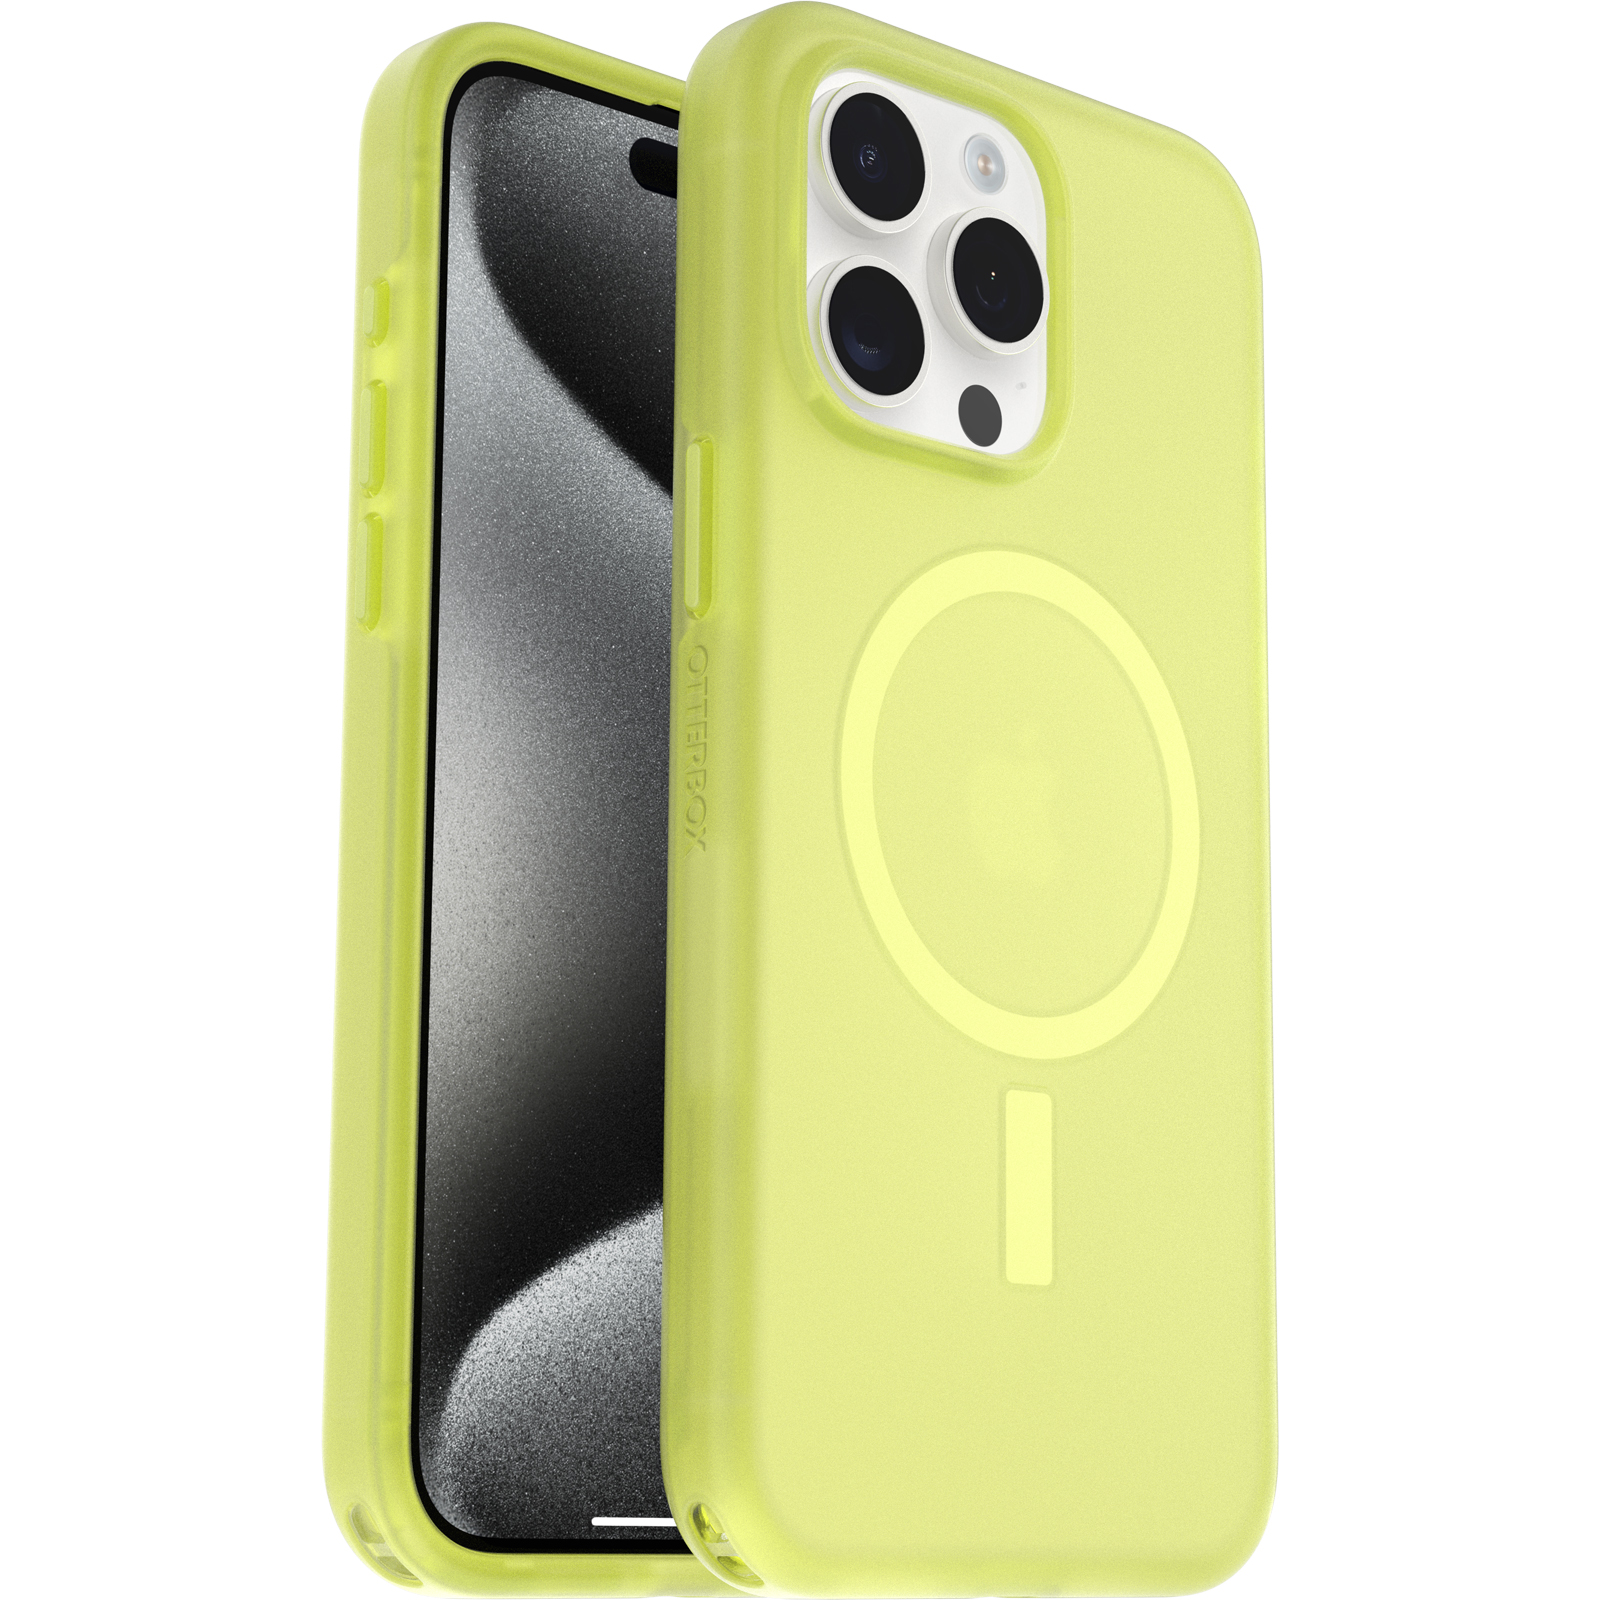 Airpods Max silicone cover - Luminous Yellow